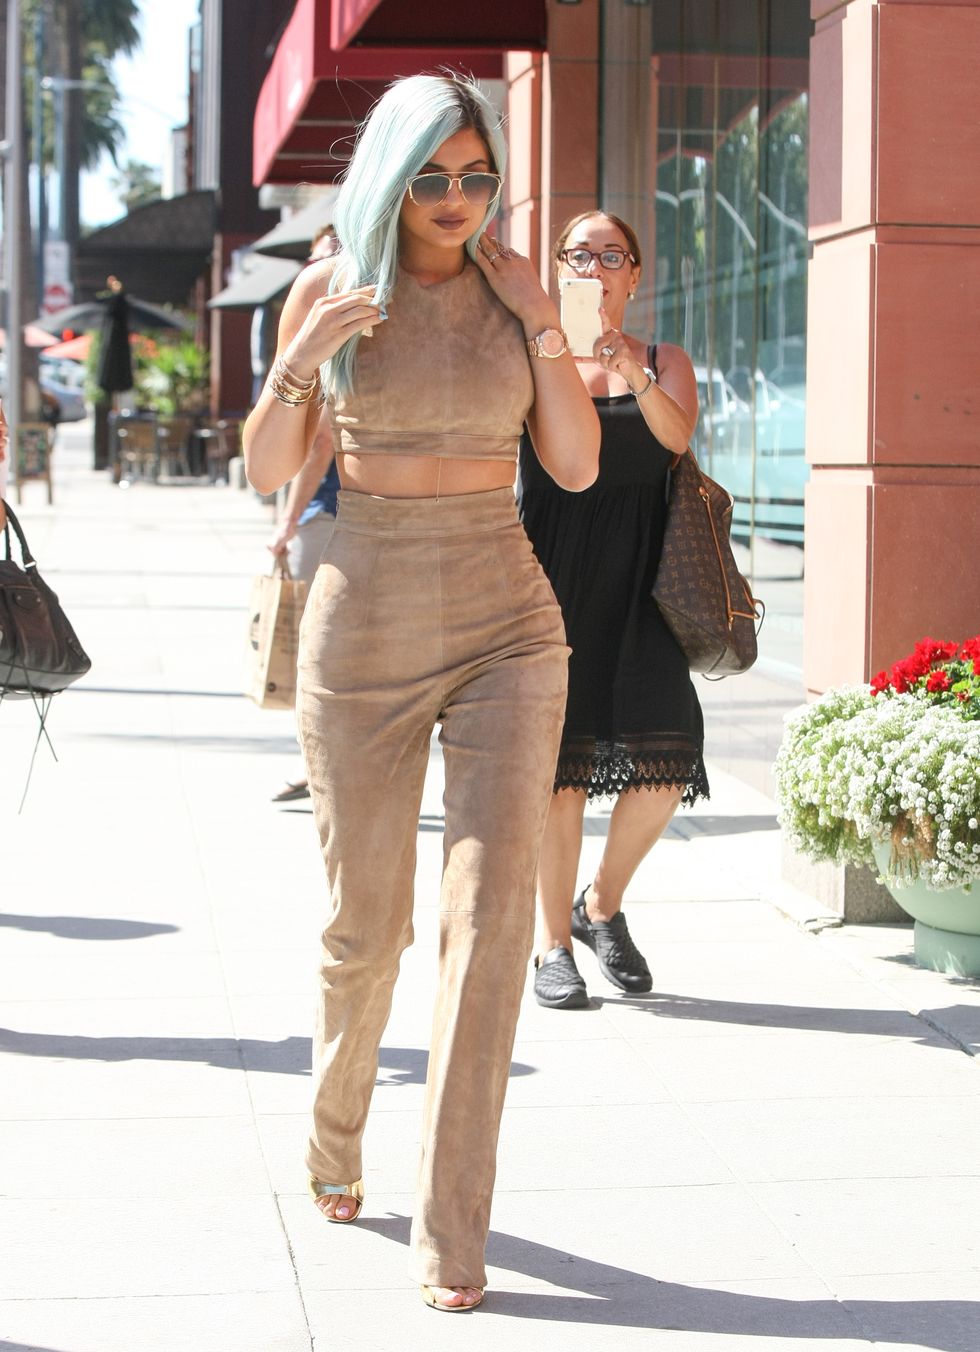 Kylie Jenner wears matching suede crop top and trousers while out in LA